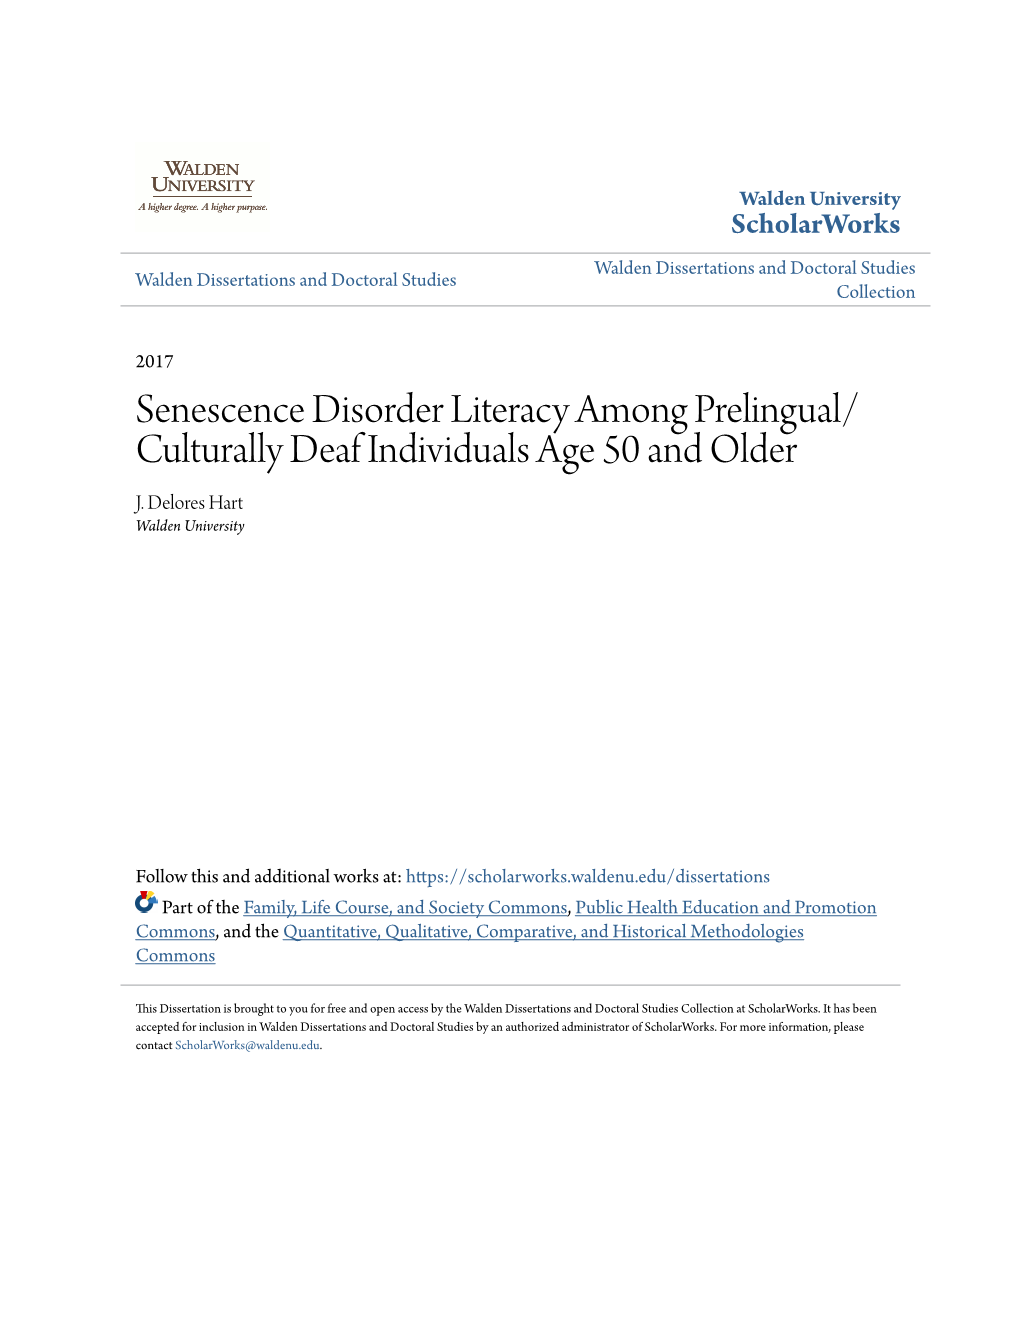 Senescence Disorder Literacy Among Prelingual/Culturally Deaf Individuals Age 50 and Older